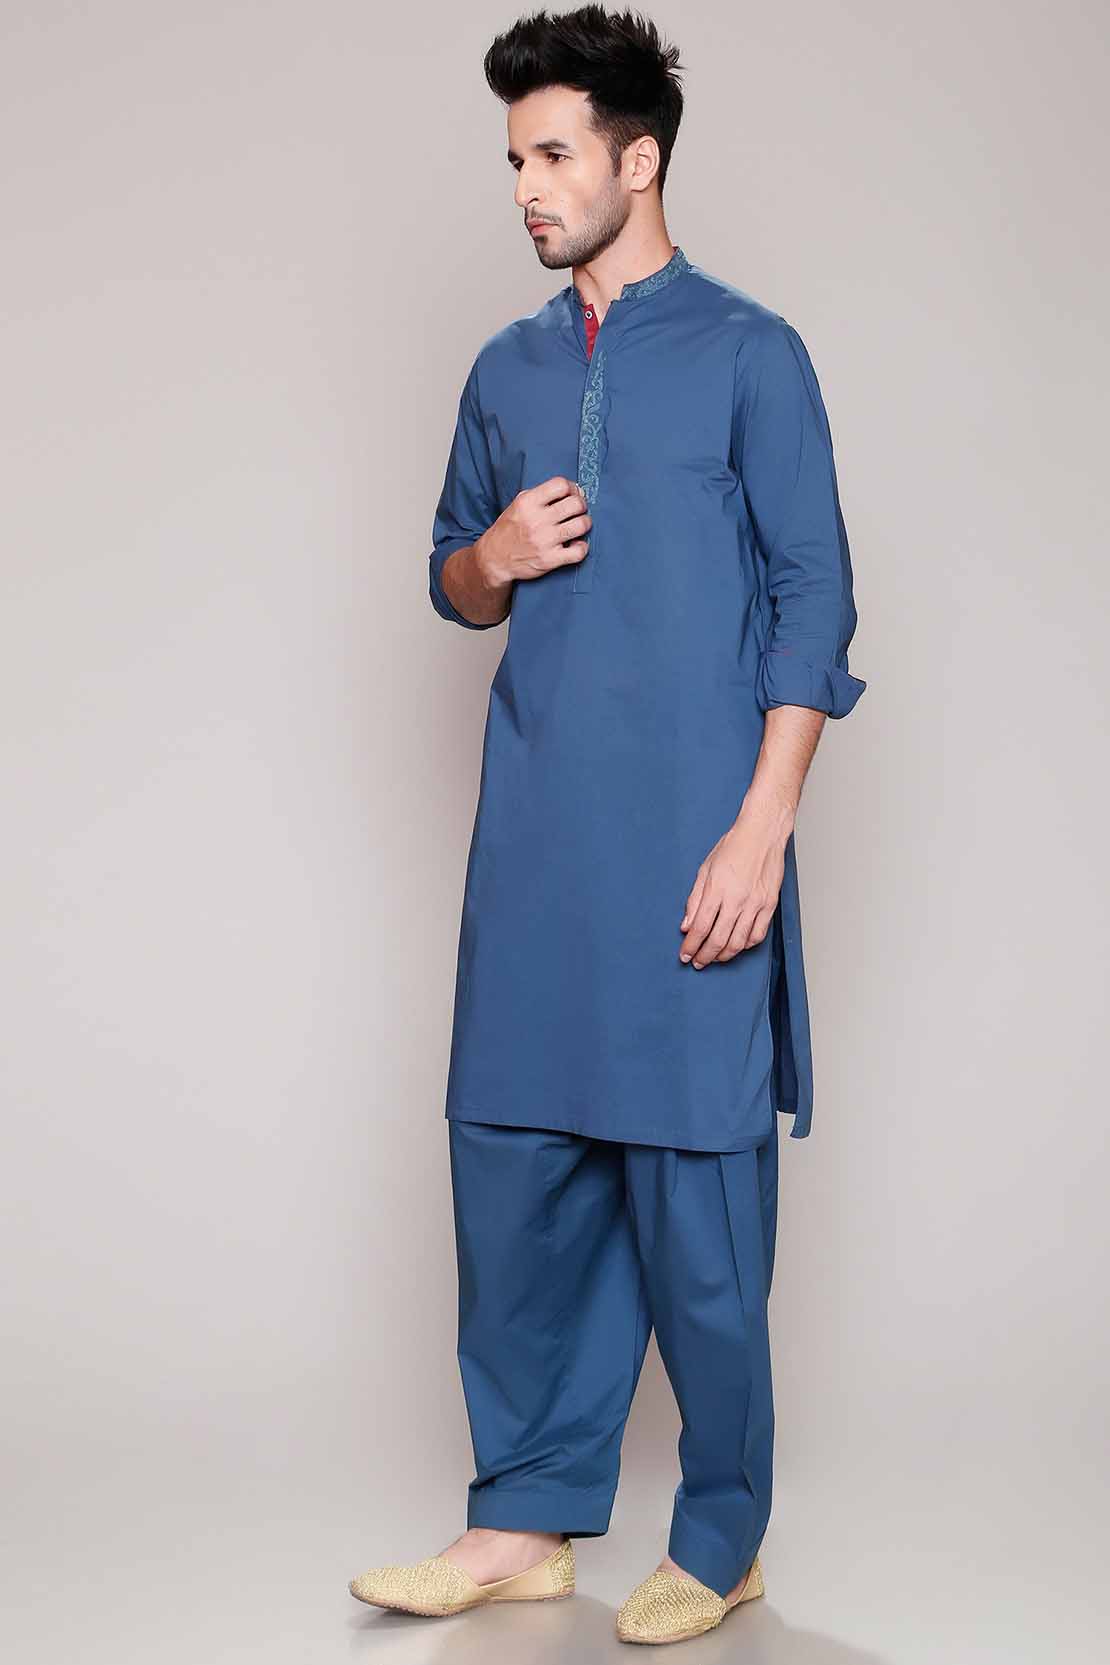 Latest Men Modern Kurta Styles Designs Collection 2022 by Chinyere